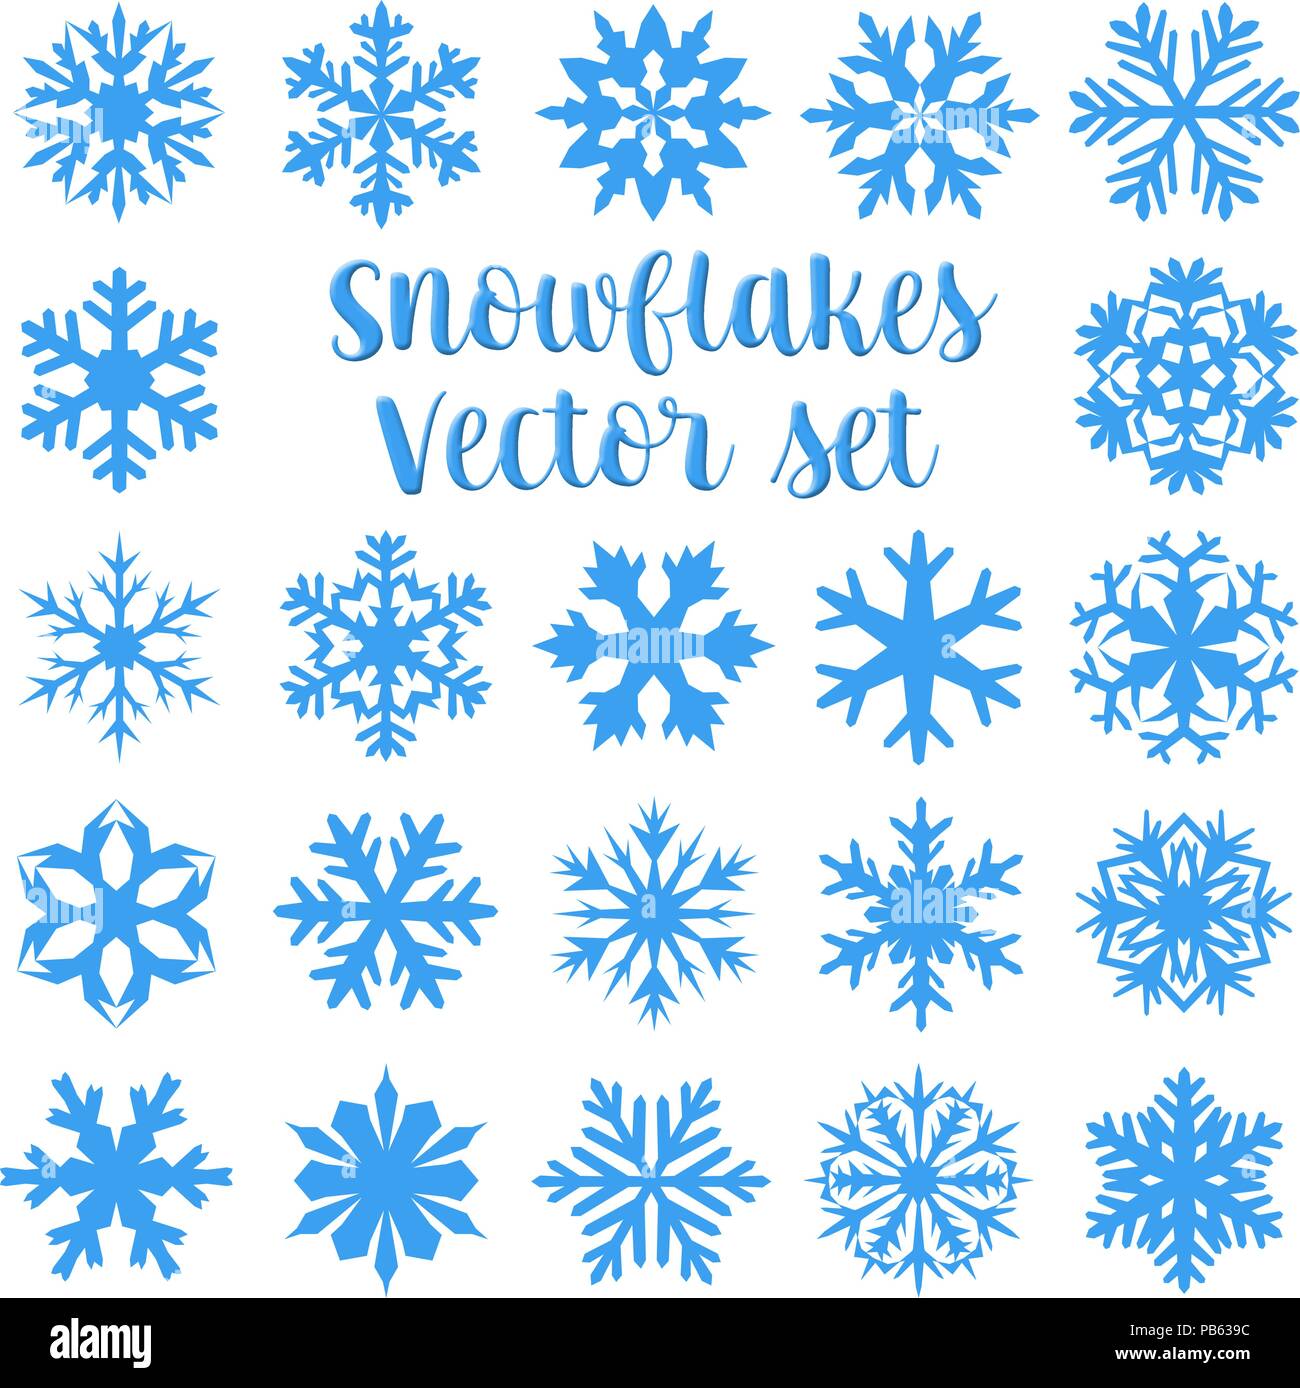 A Collection Of Beautiful Vector Art Winter Snowflakes Stock Vector